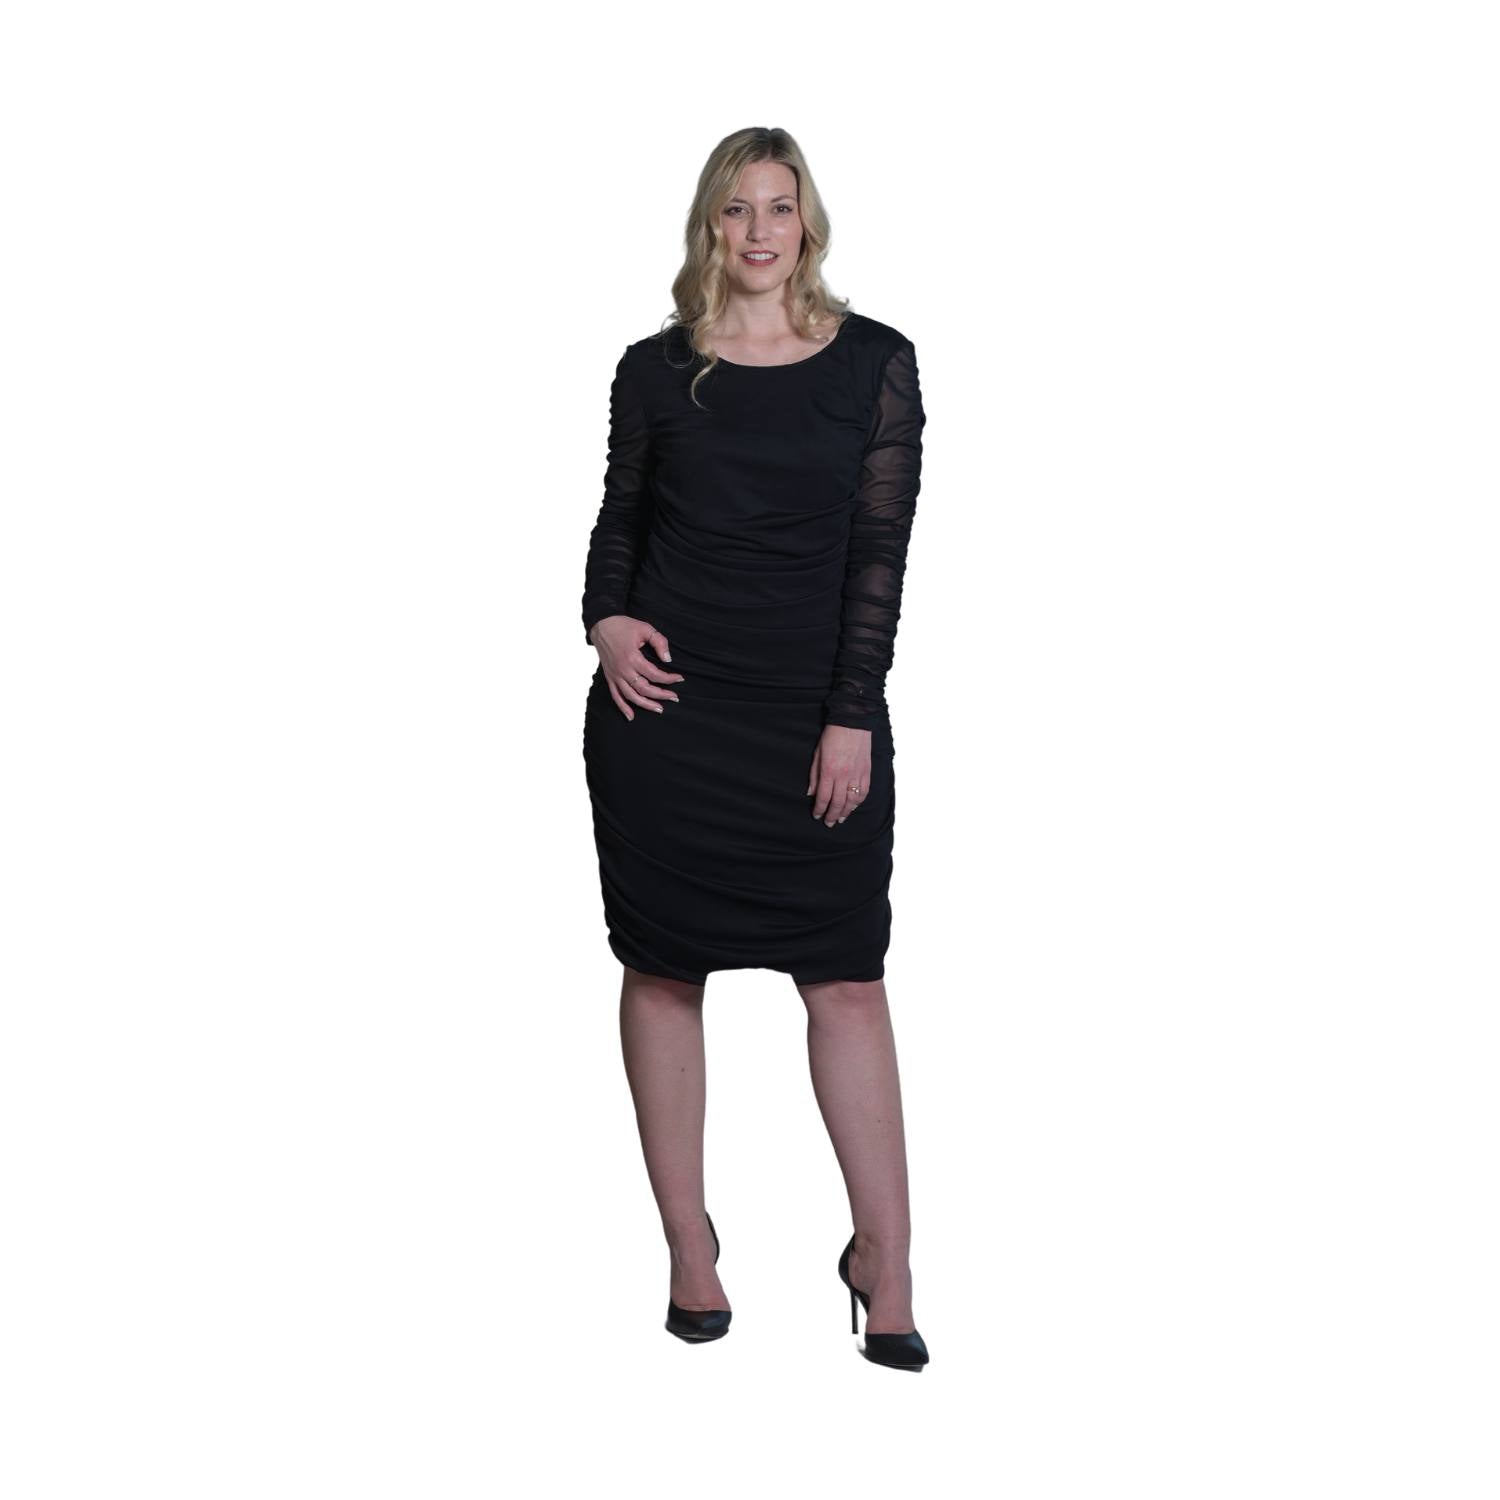 Women's Black Mid Size Ruched Bodycon Midi Dress styled with black heels for a classic and elegant touch.